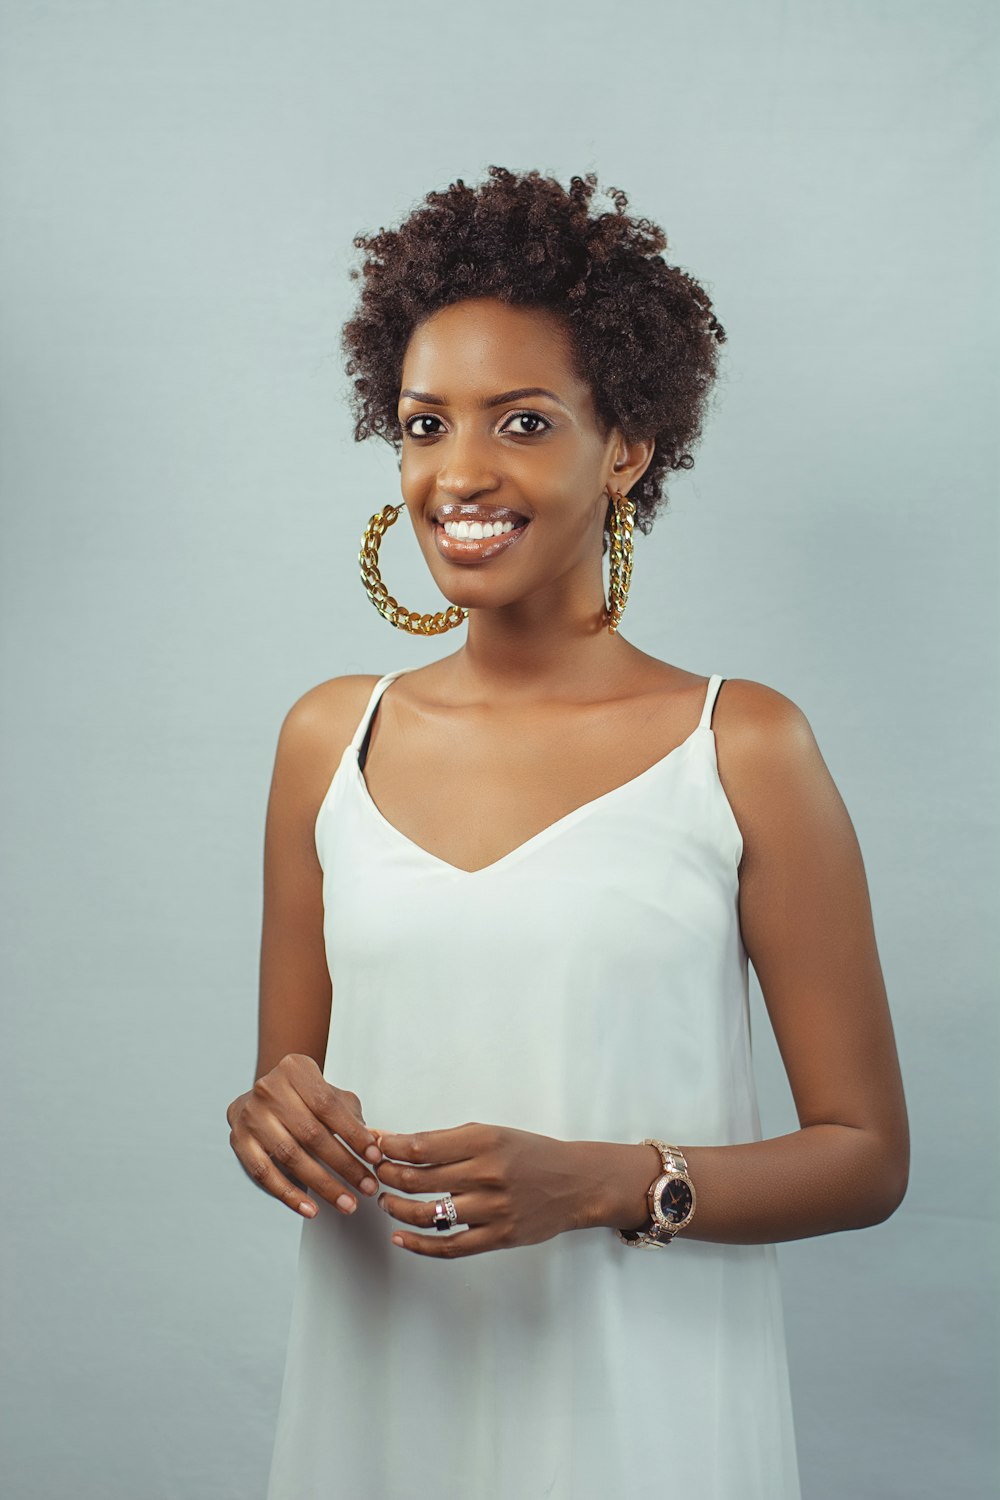 a woman wearing a white dress and gold hoop earrings